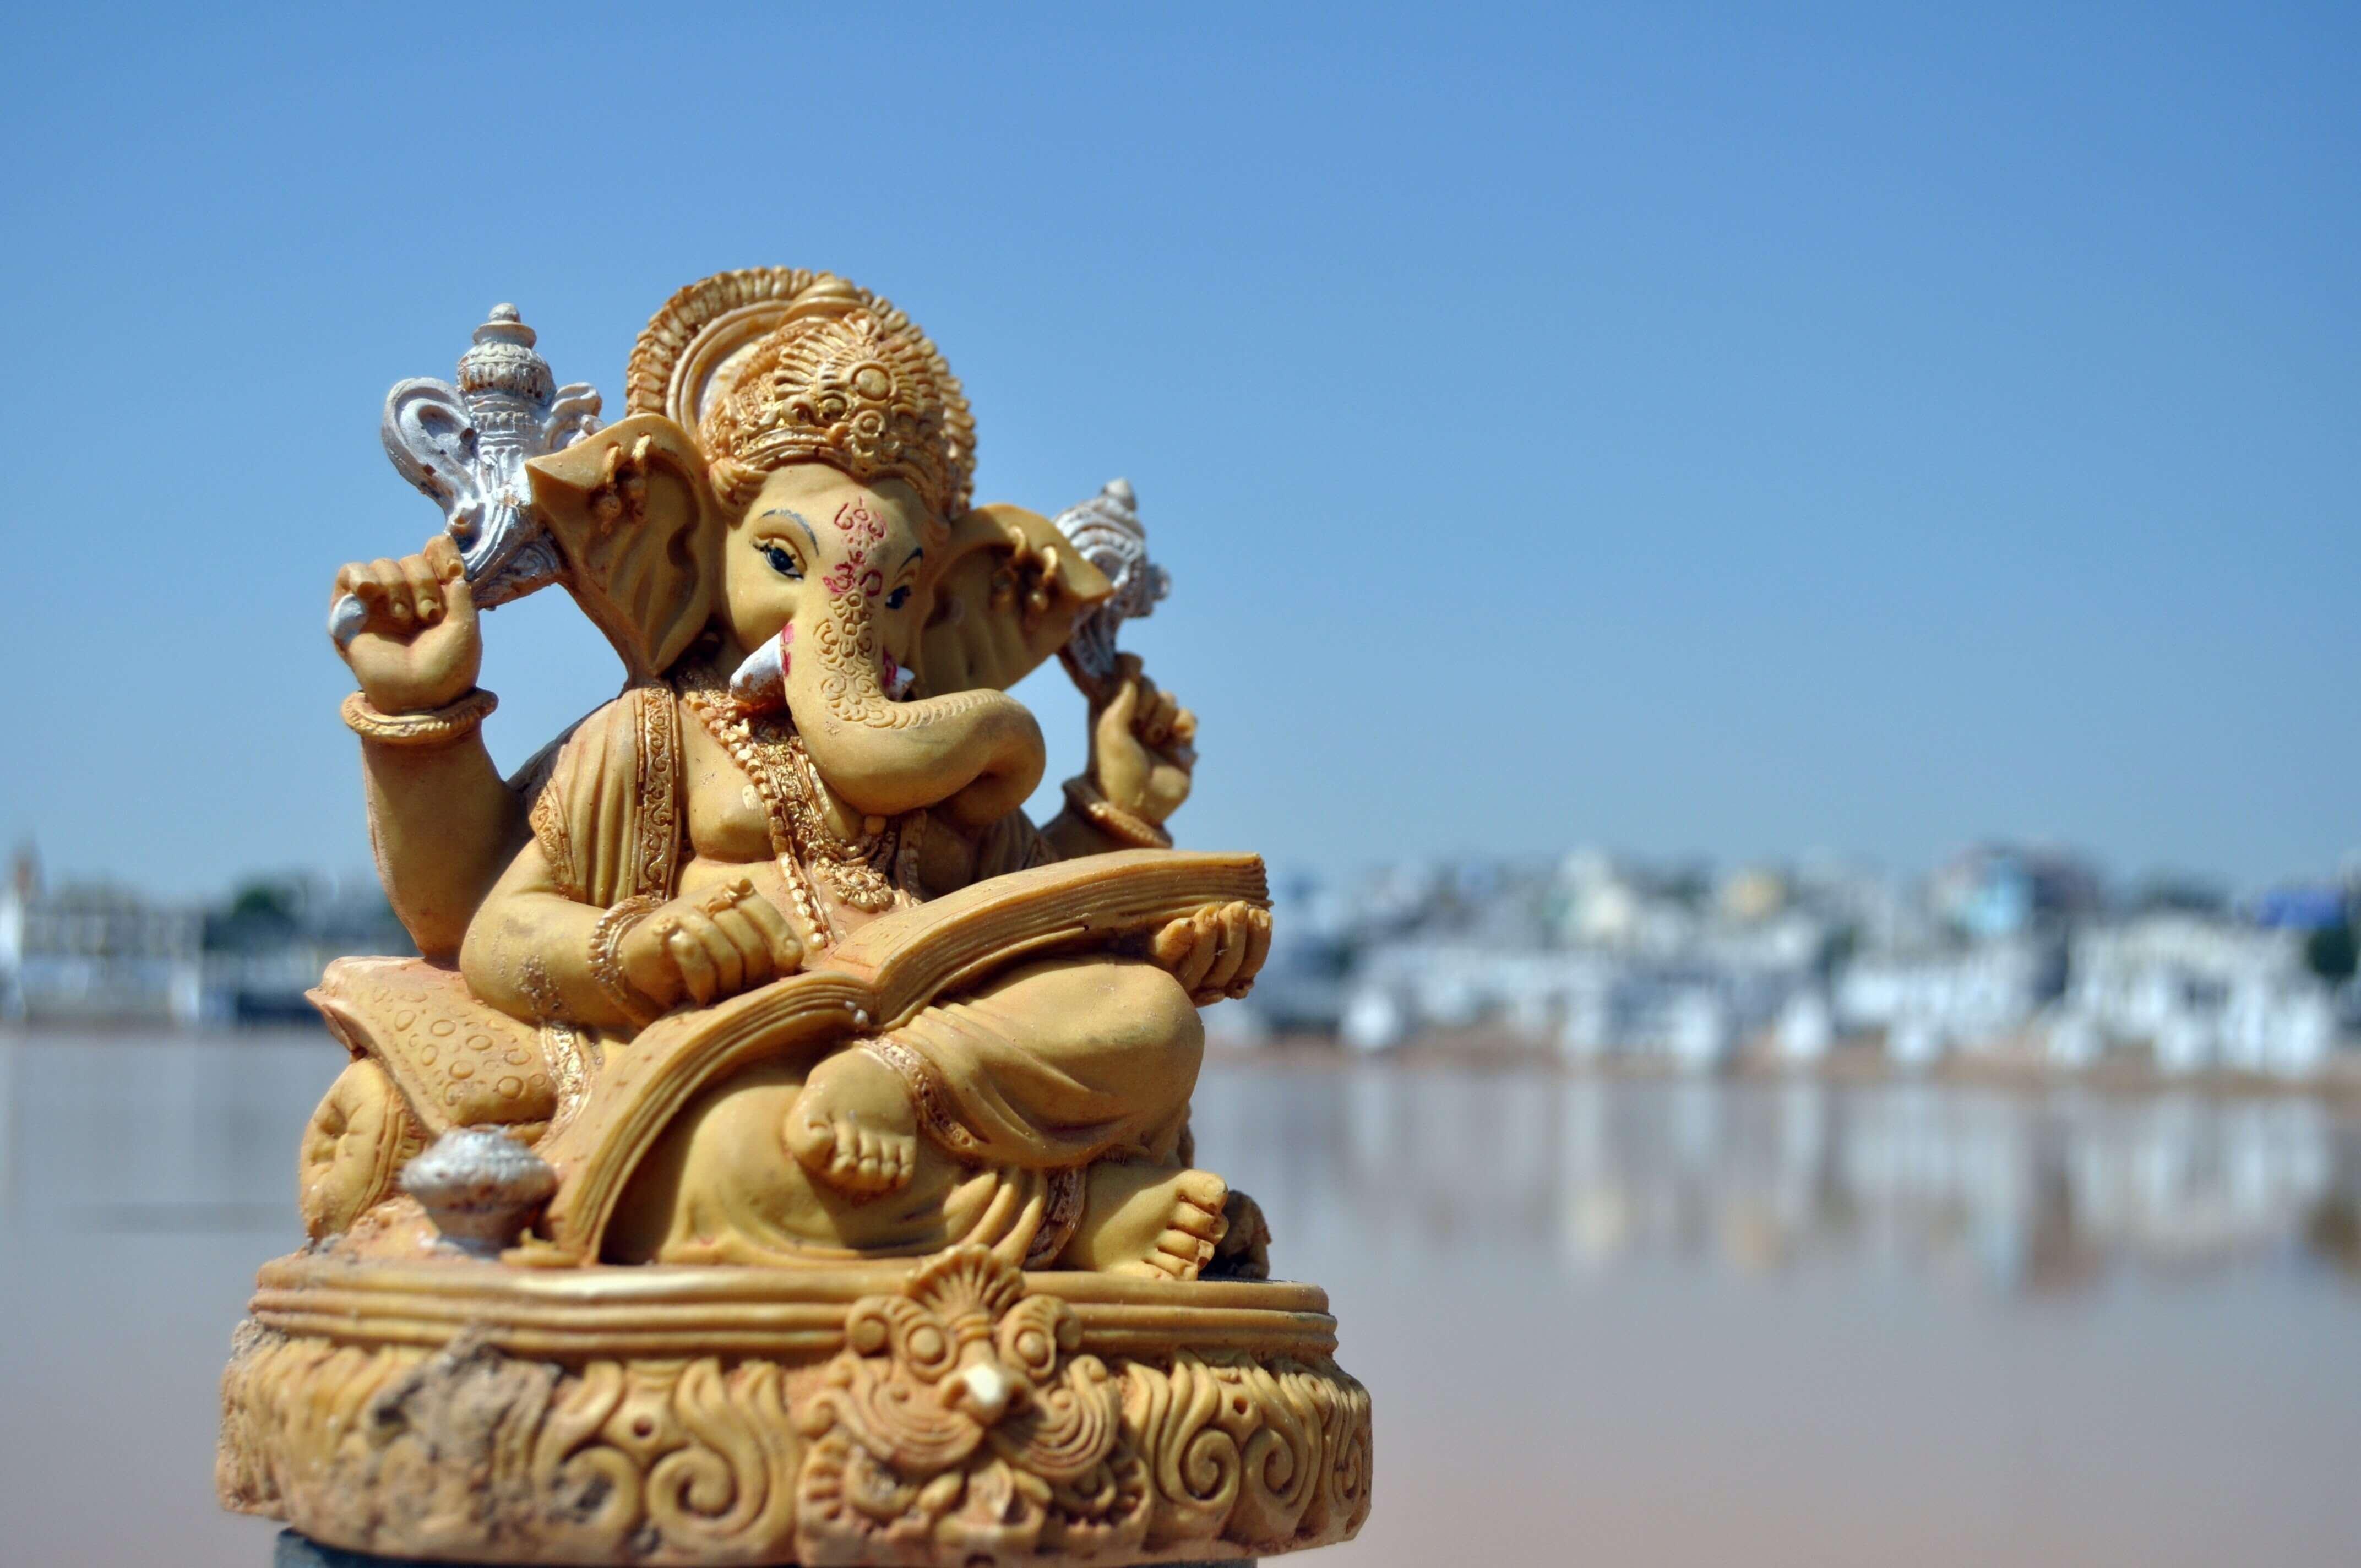 Lesser Known Short Stories About The Lord Of Wisdom, Ganesha